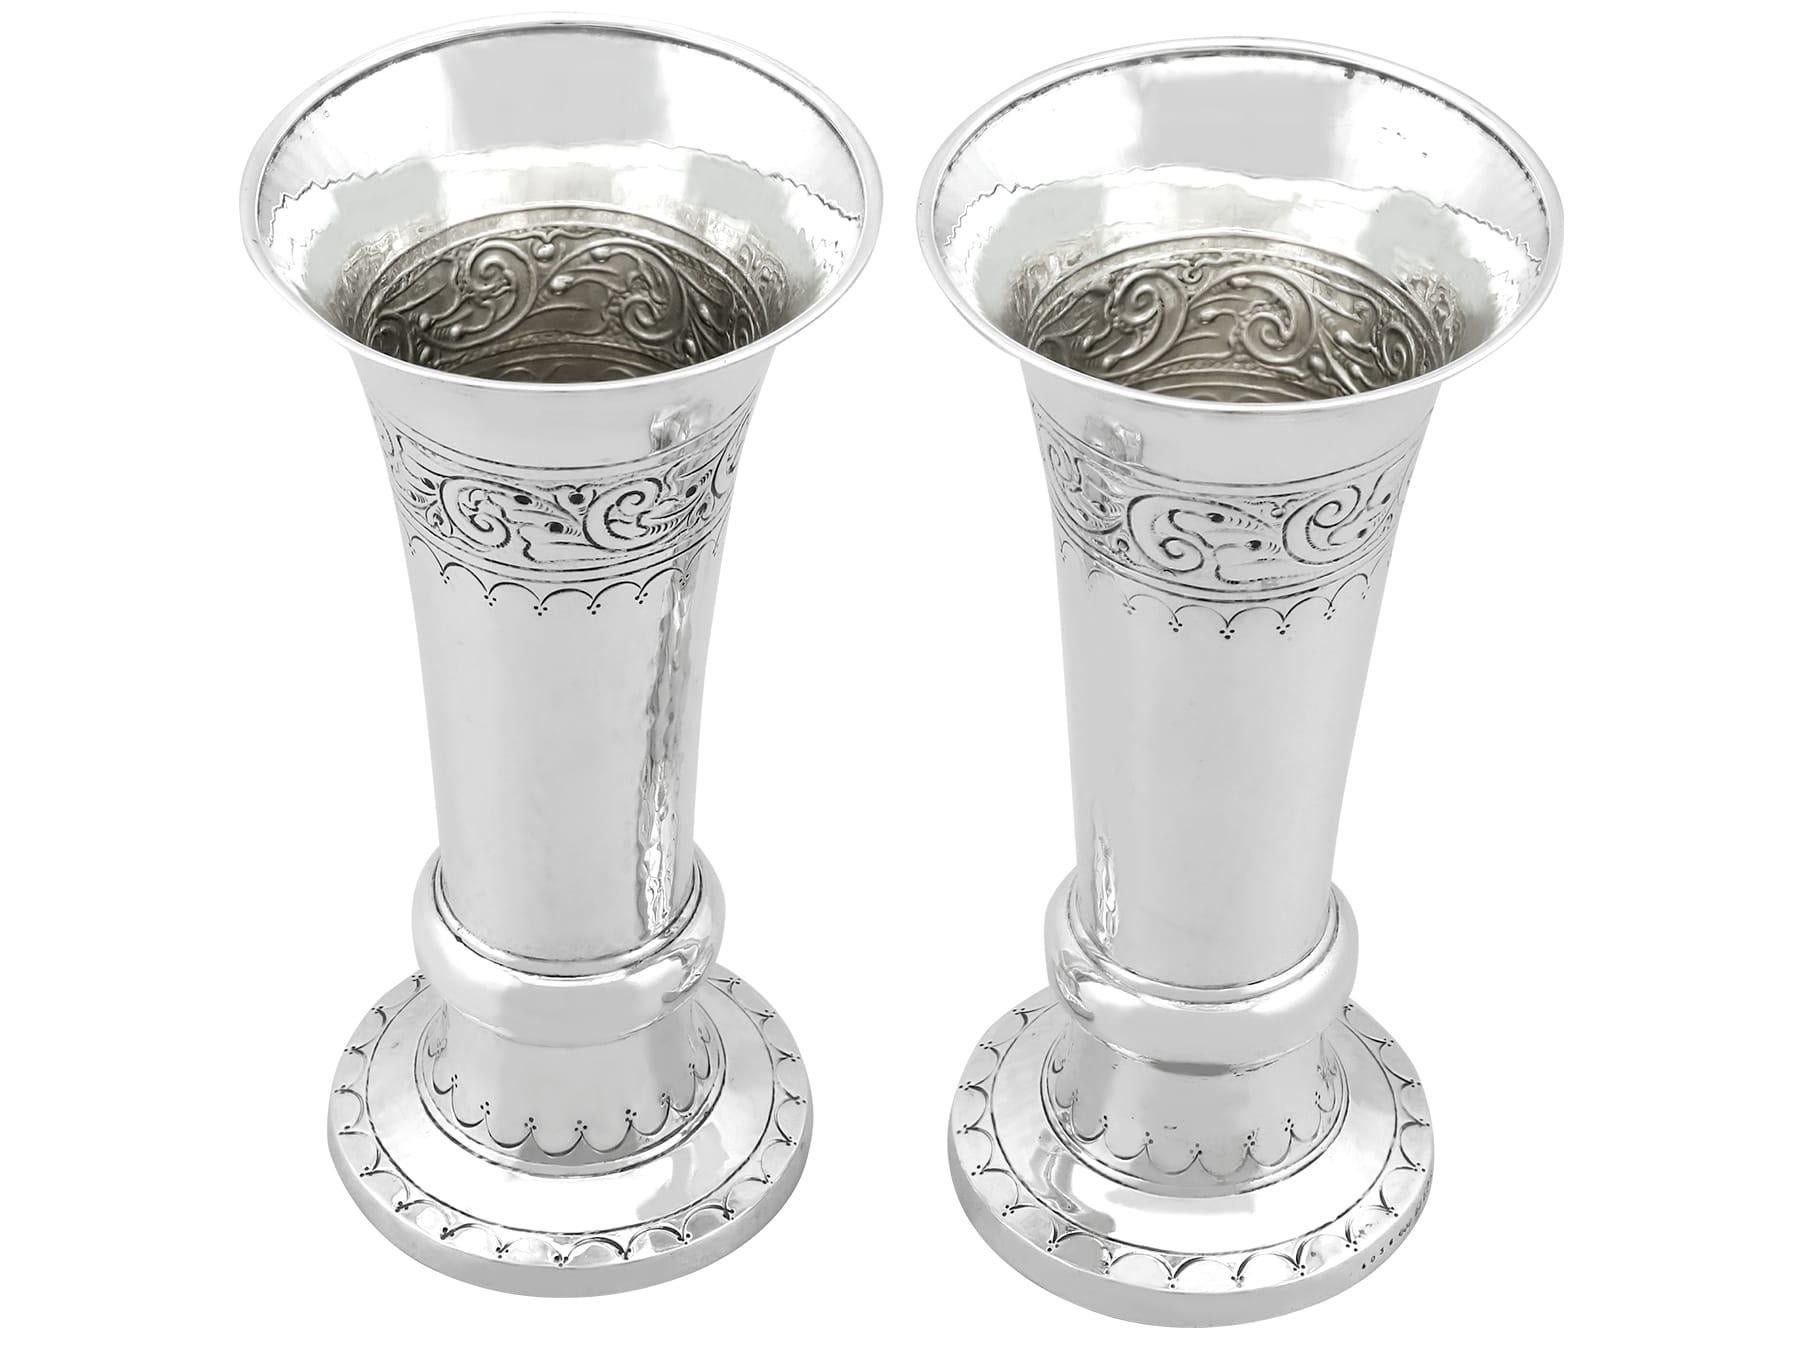 An exceptional, fine and impressive pair of antique George V sterling silver Arts and Crafts style vases made by Liberty & Co Ltd; an addition to our ornamental Arts and Crafts silverware collection.

These exceptional antique George V sterling